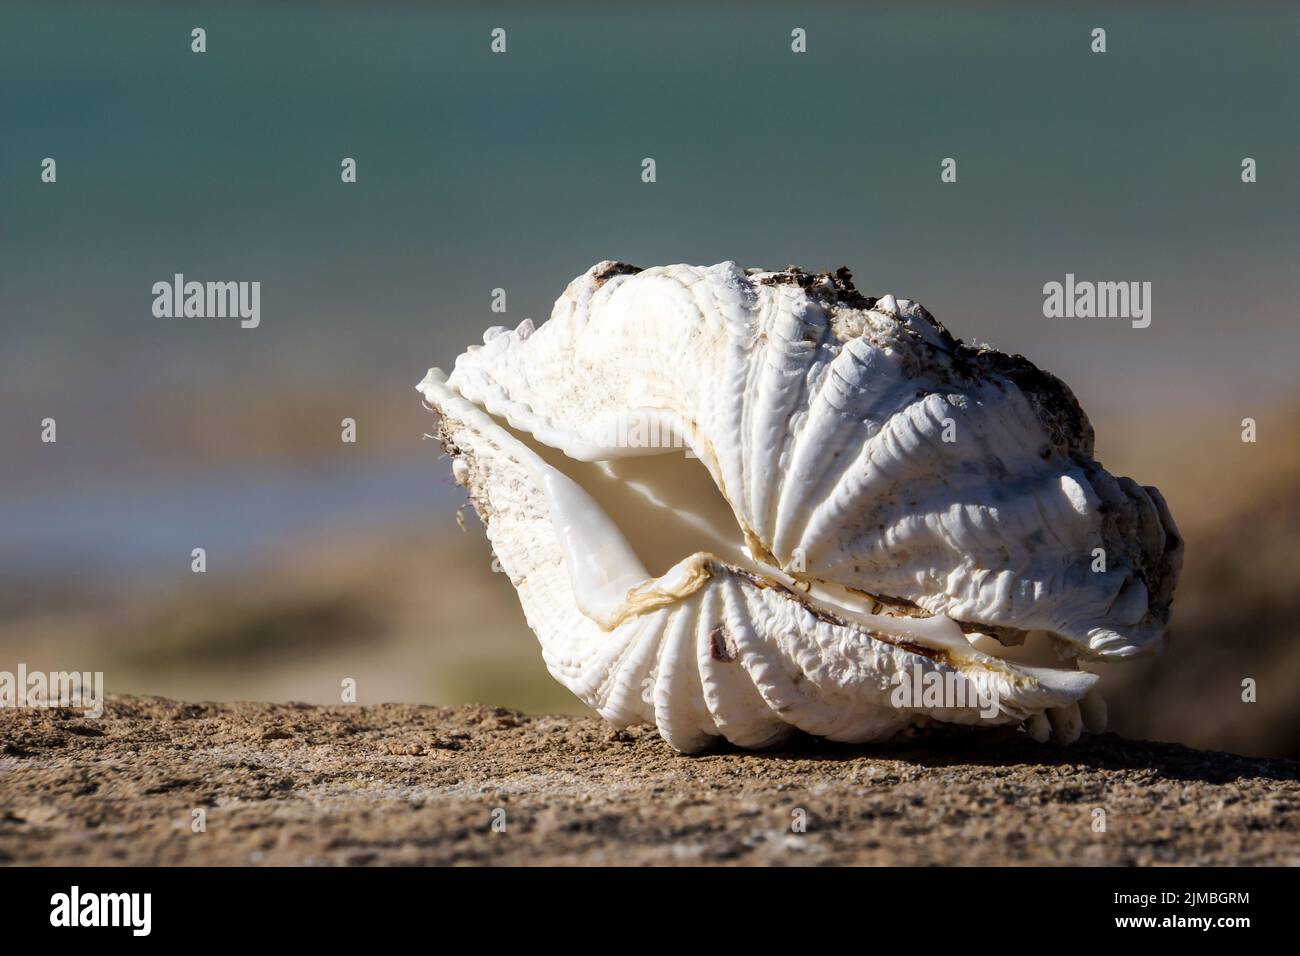 A closeup of a seashell on the sand with a blurred background Stock Photo